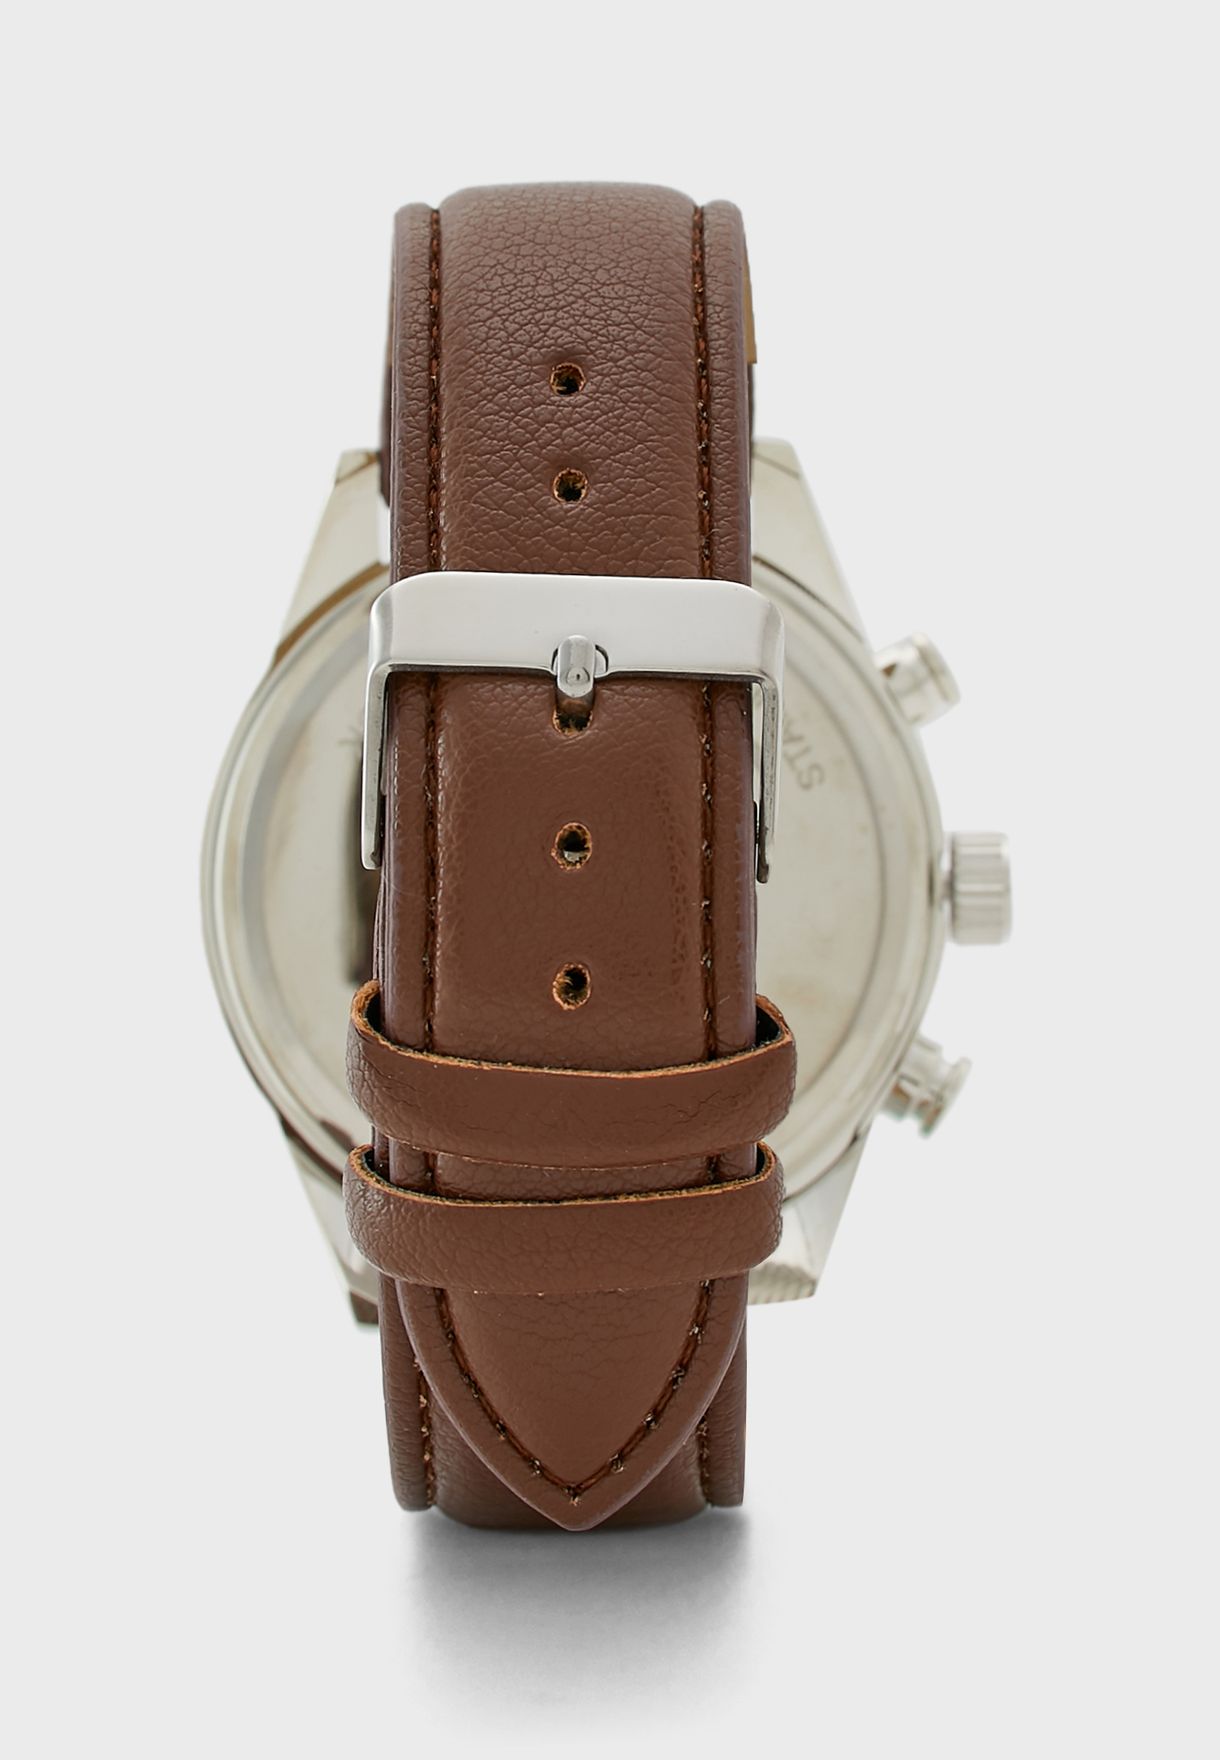 Analogue Watch With Sports Detail